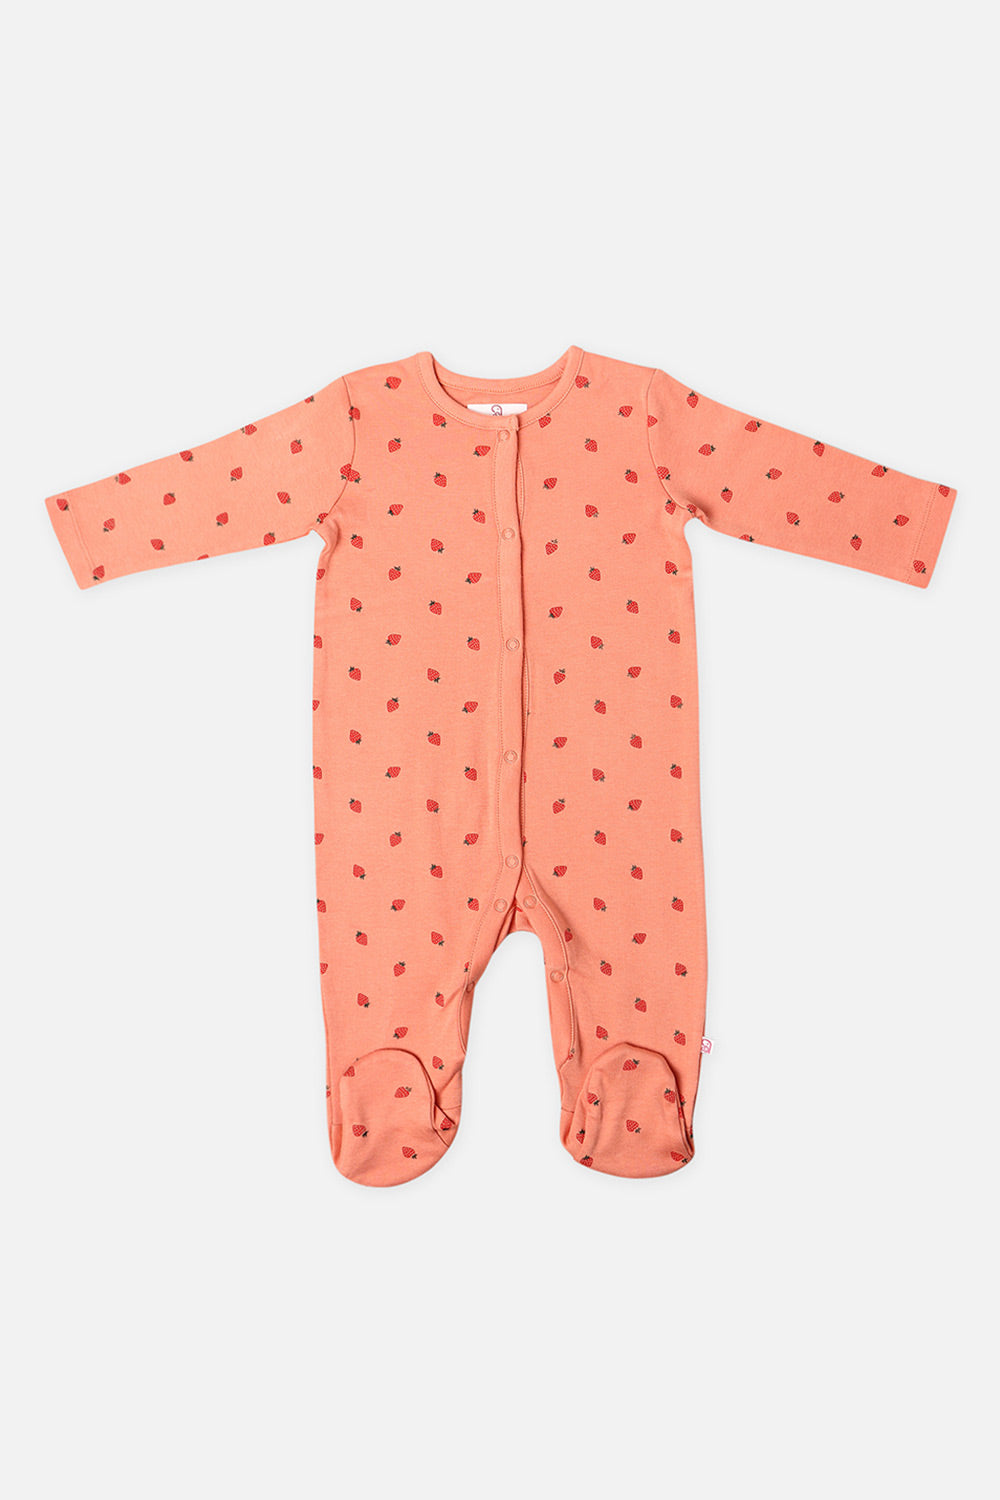 Oh Baby Body Suit Front Open Pink-B208